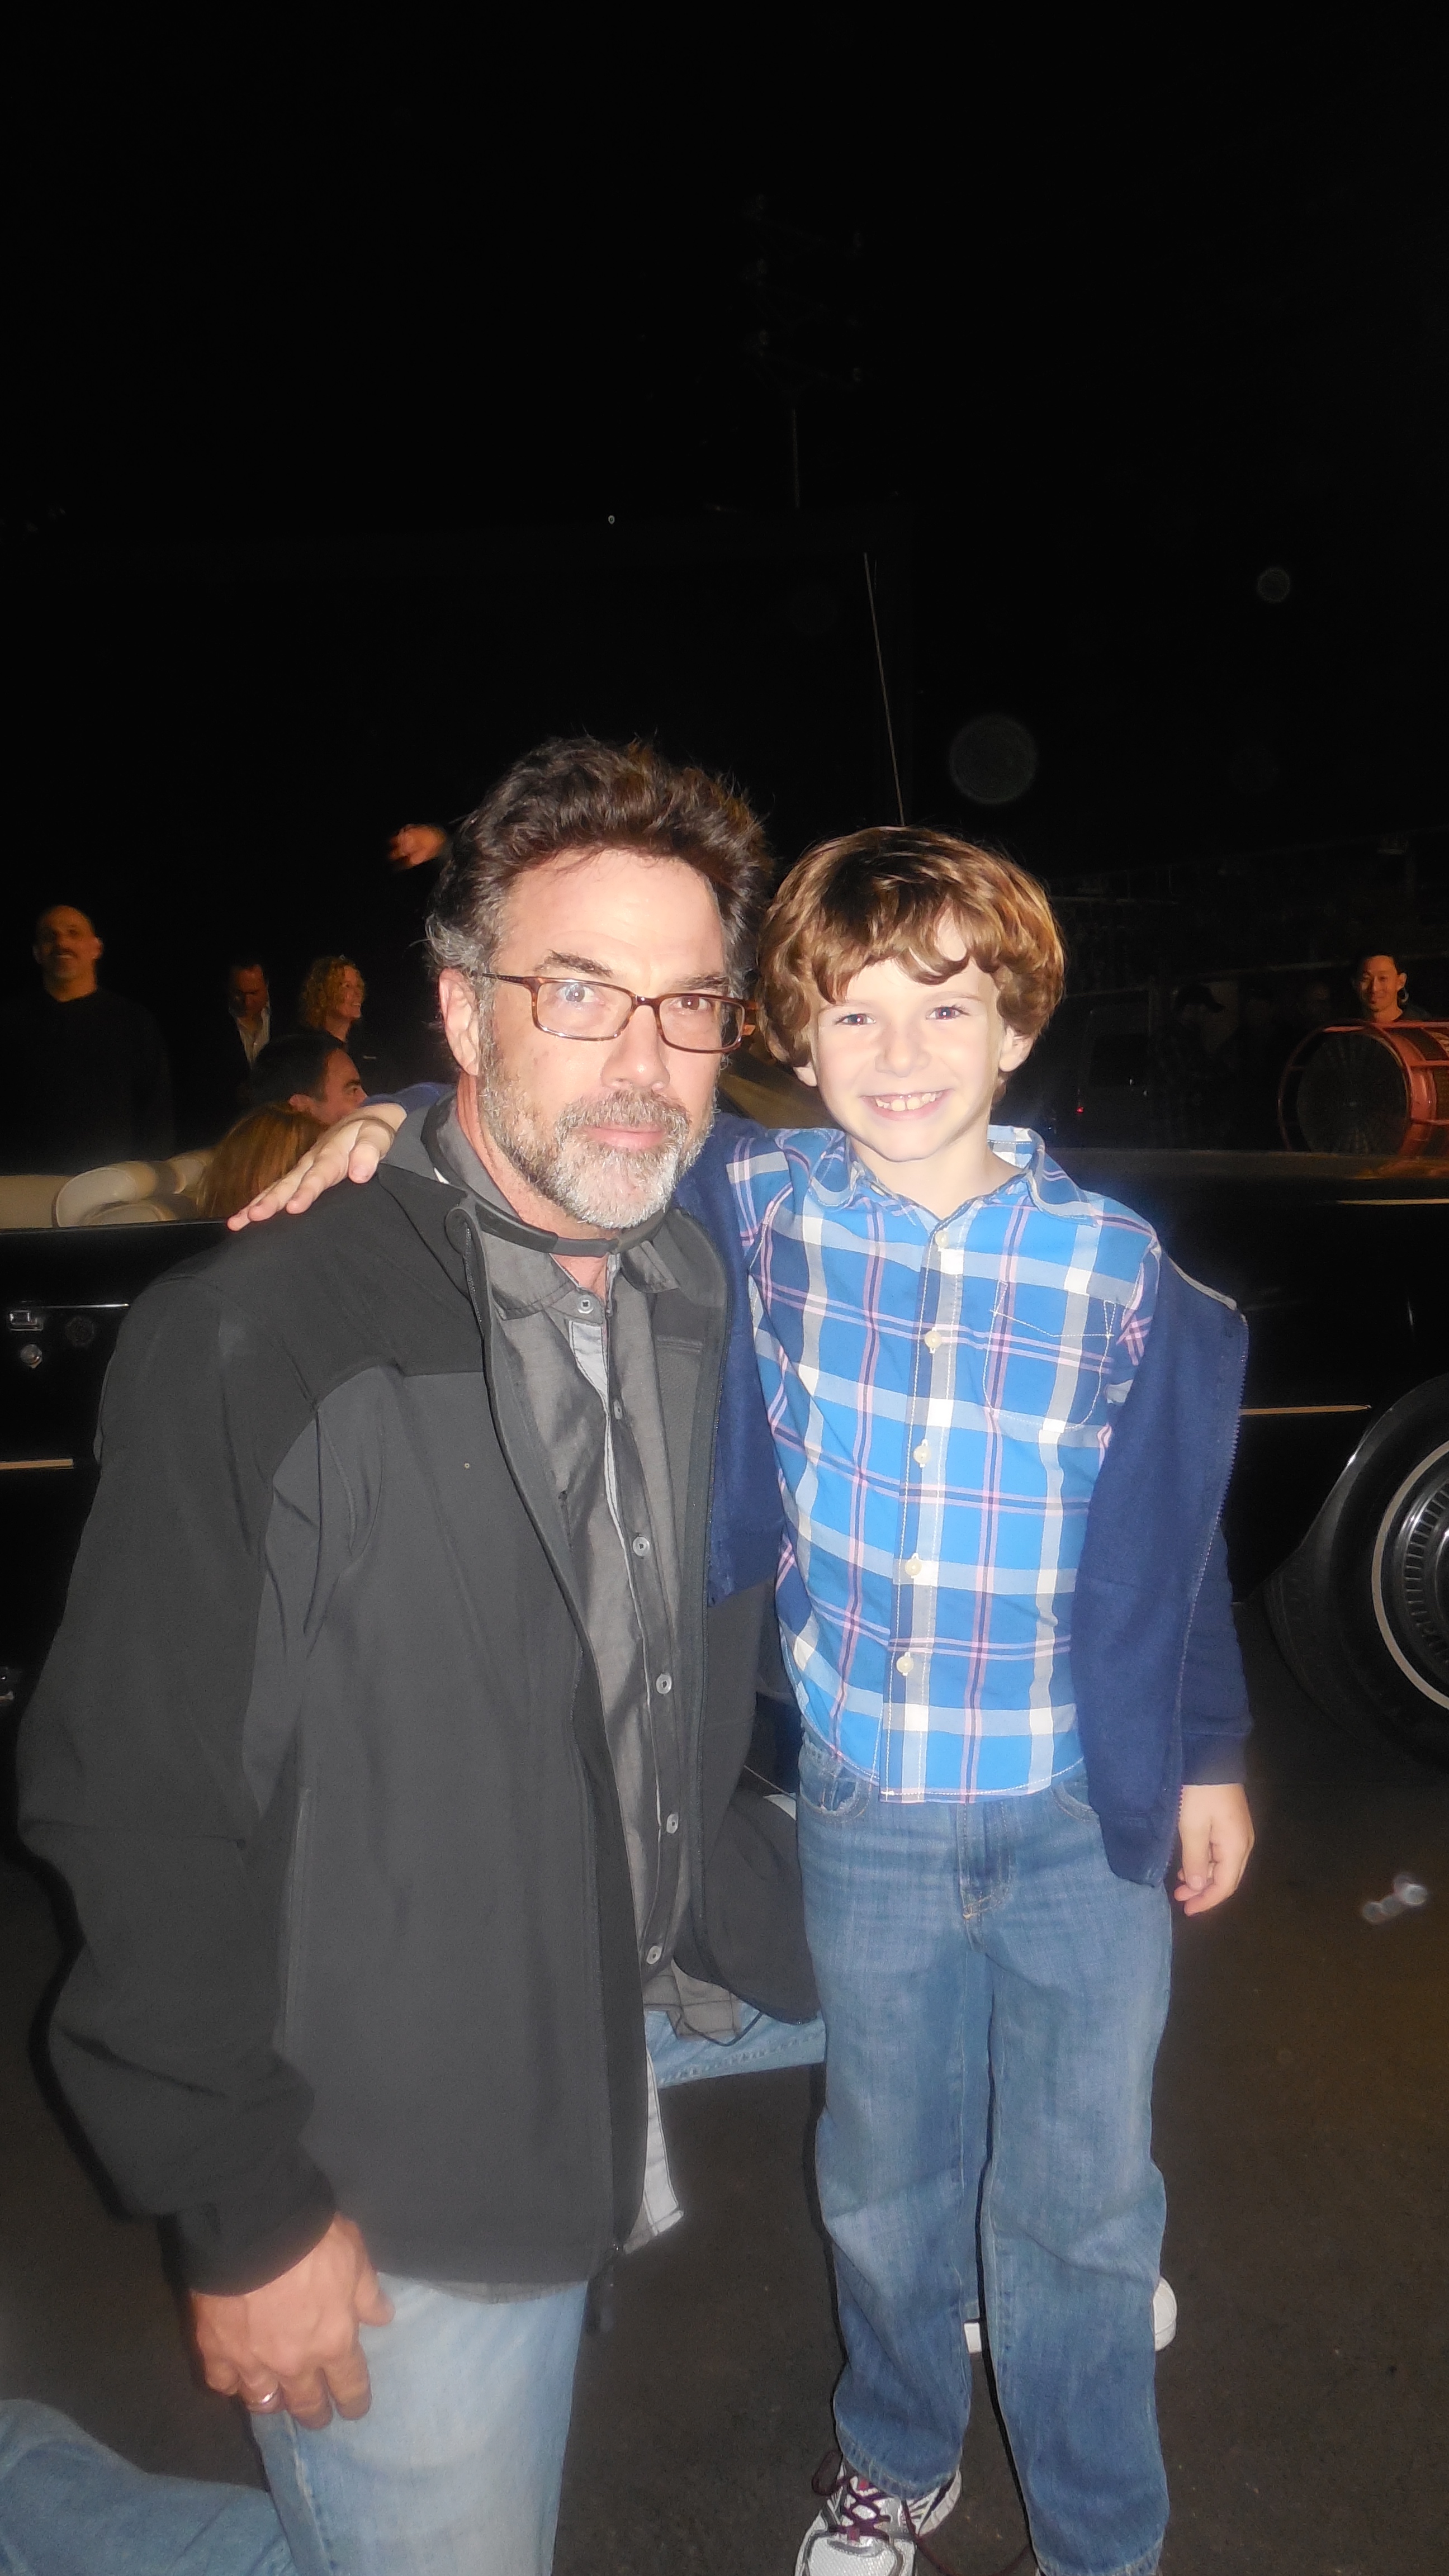 Benjamin and Director Timothy D. Beavers on the set of CSI - Crime Scene Investigation Episode 15.16 